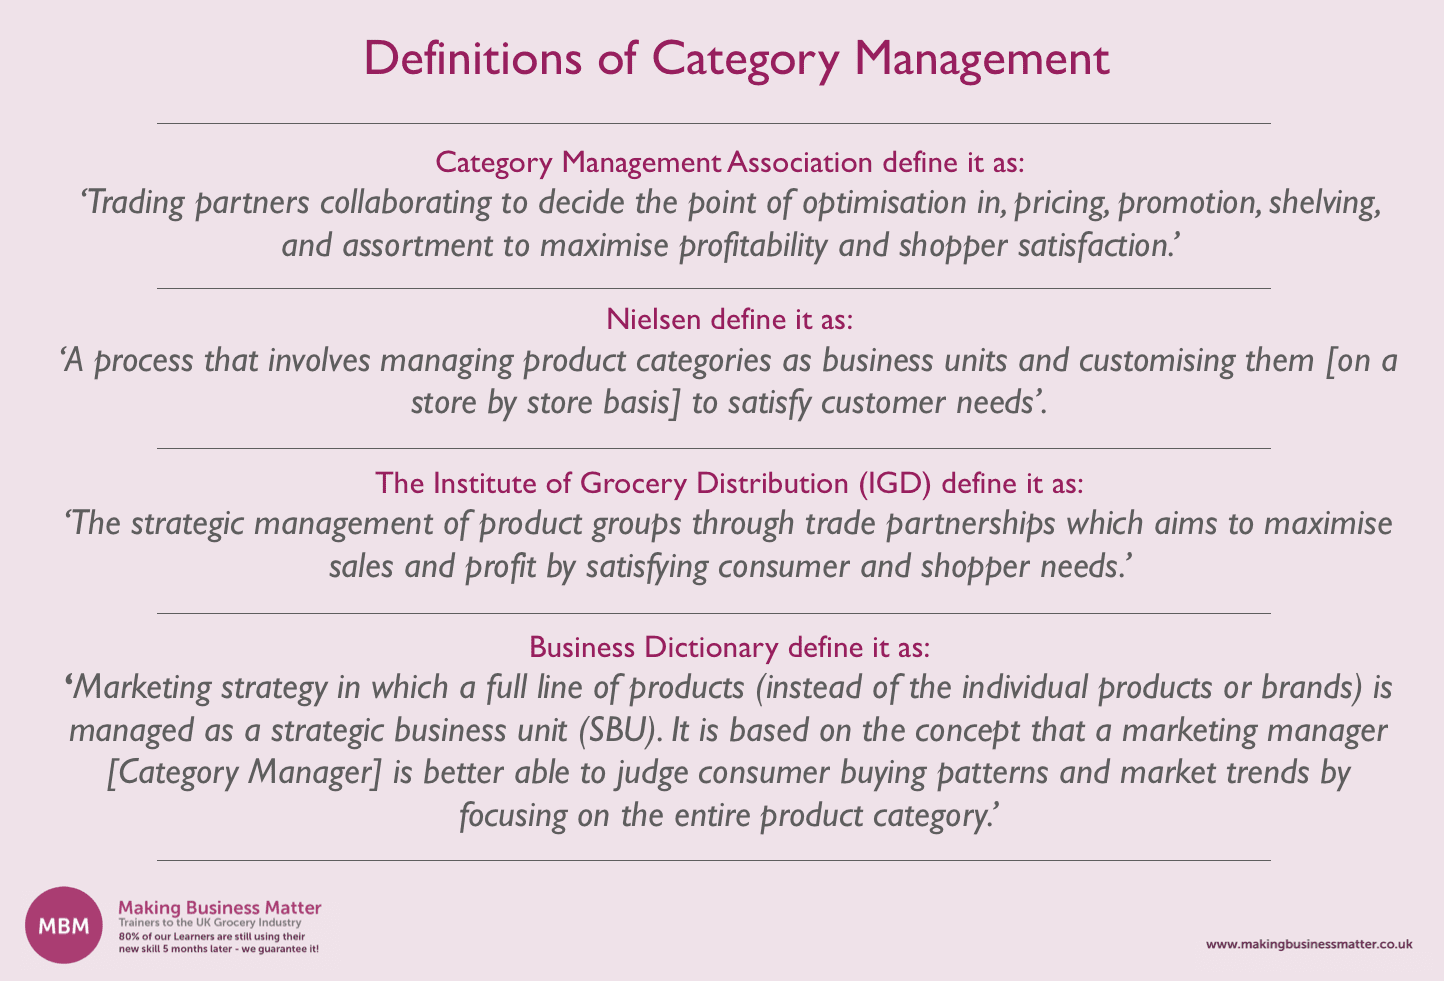 Several definitions of category management with MBM logo